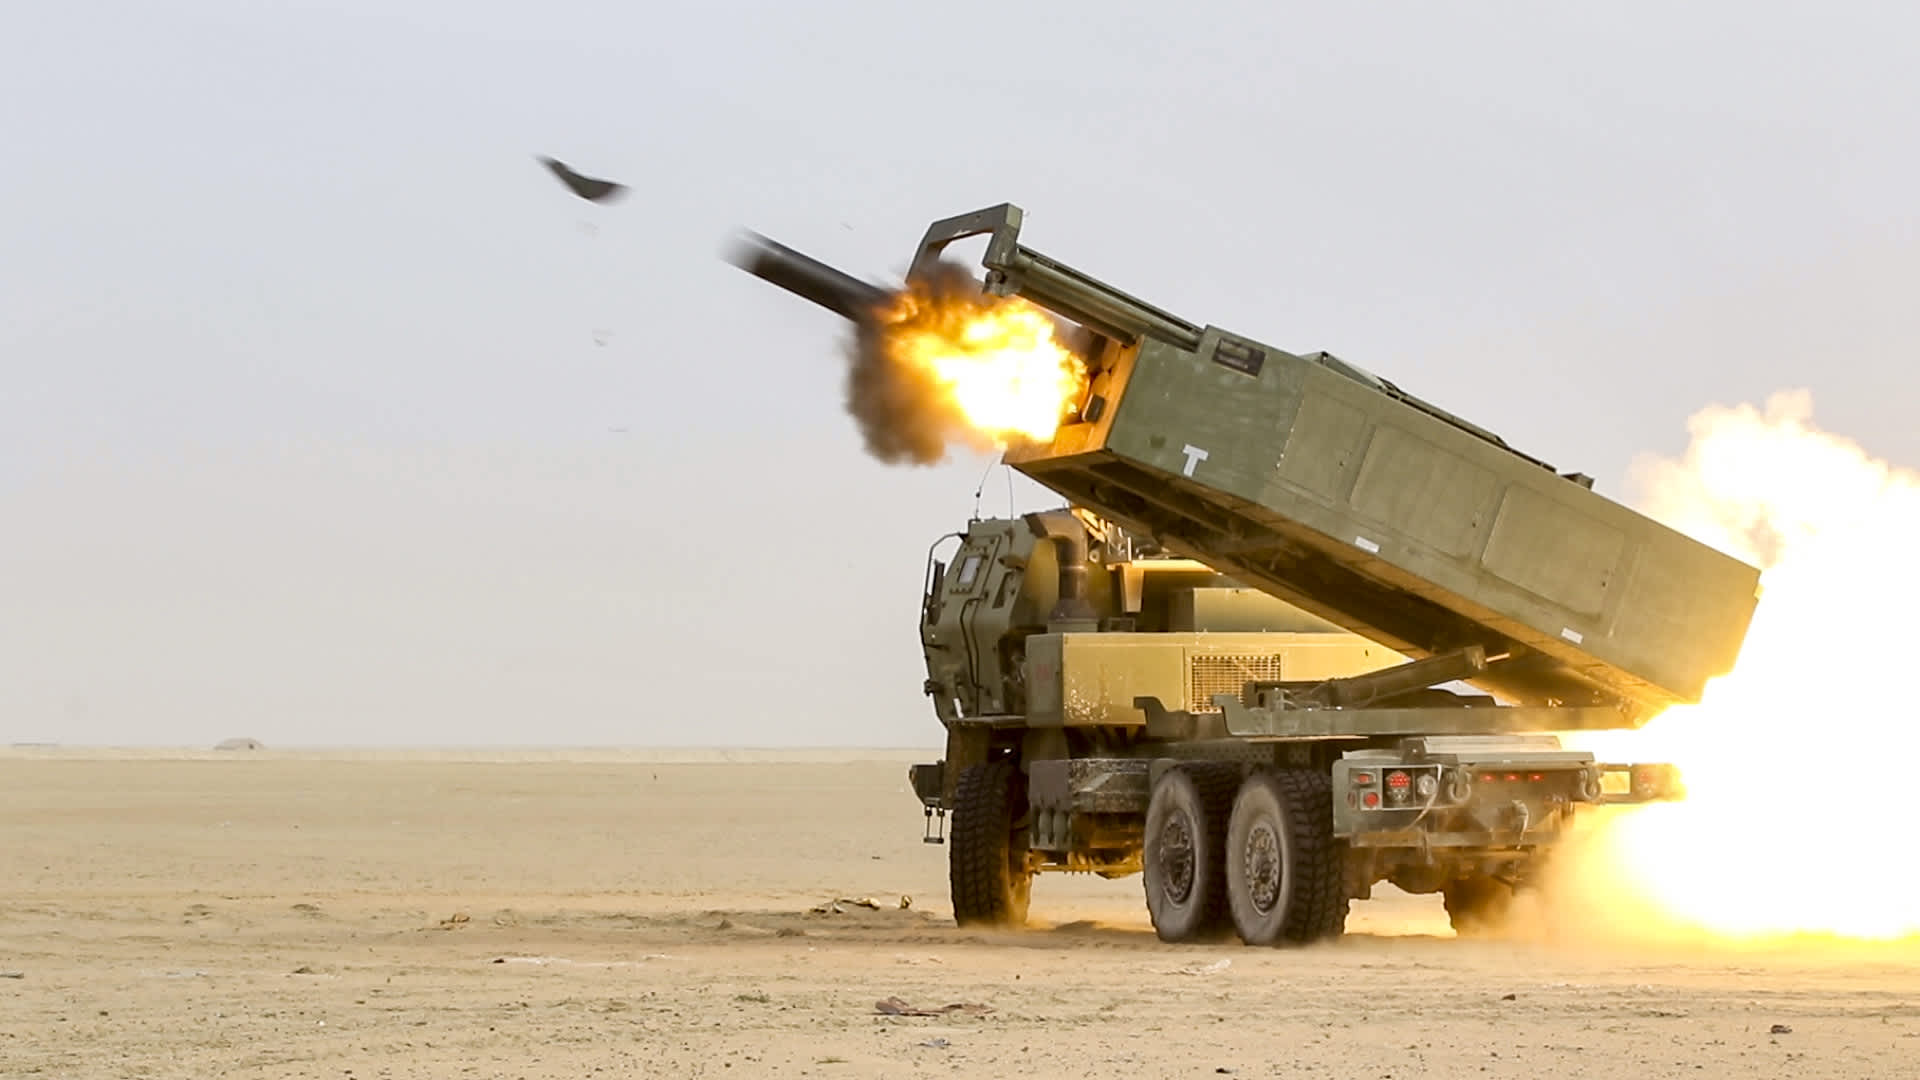 U.S. Soldiers assigned to the 65th Field Artillery Brigade fire a High Mobility Artillery Rocket System (HIMARS) during a joint live-fire exercise with the Kuwait Land Forces, Jan. 8, 2019, near Camp Buehring, Kuwait.